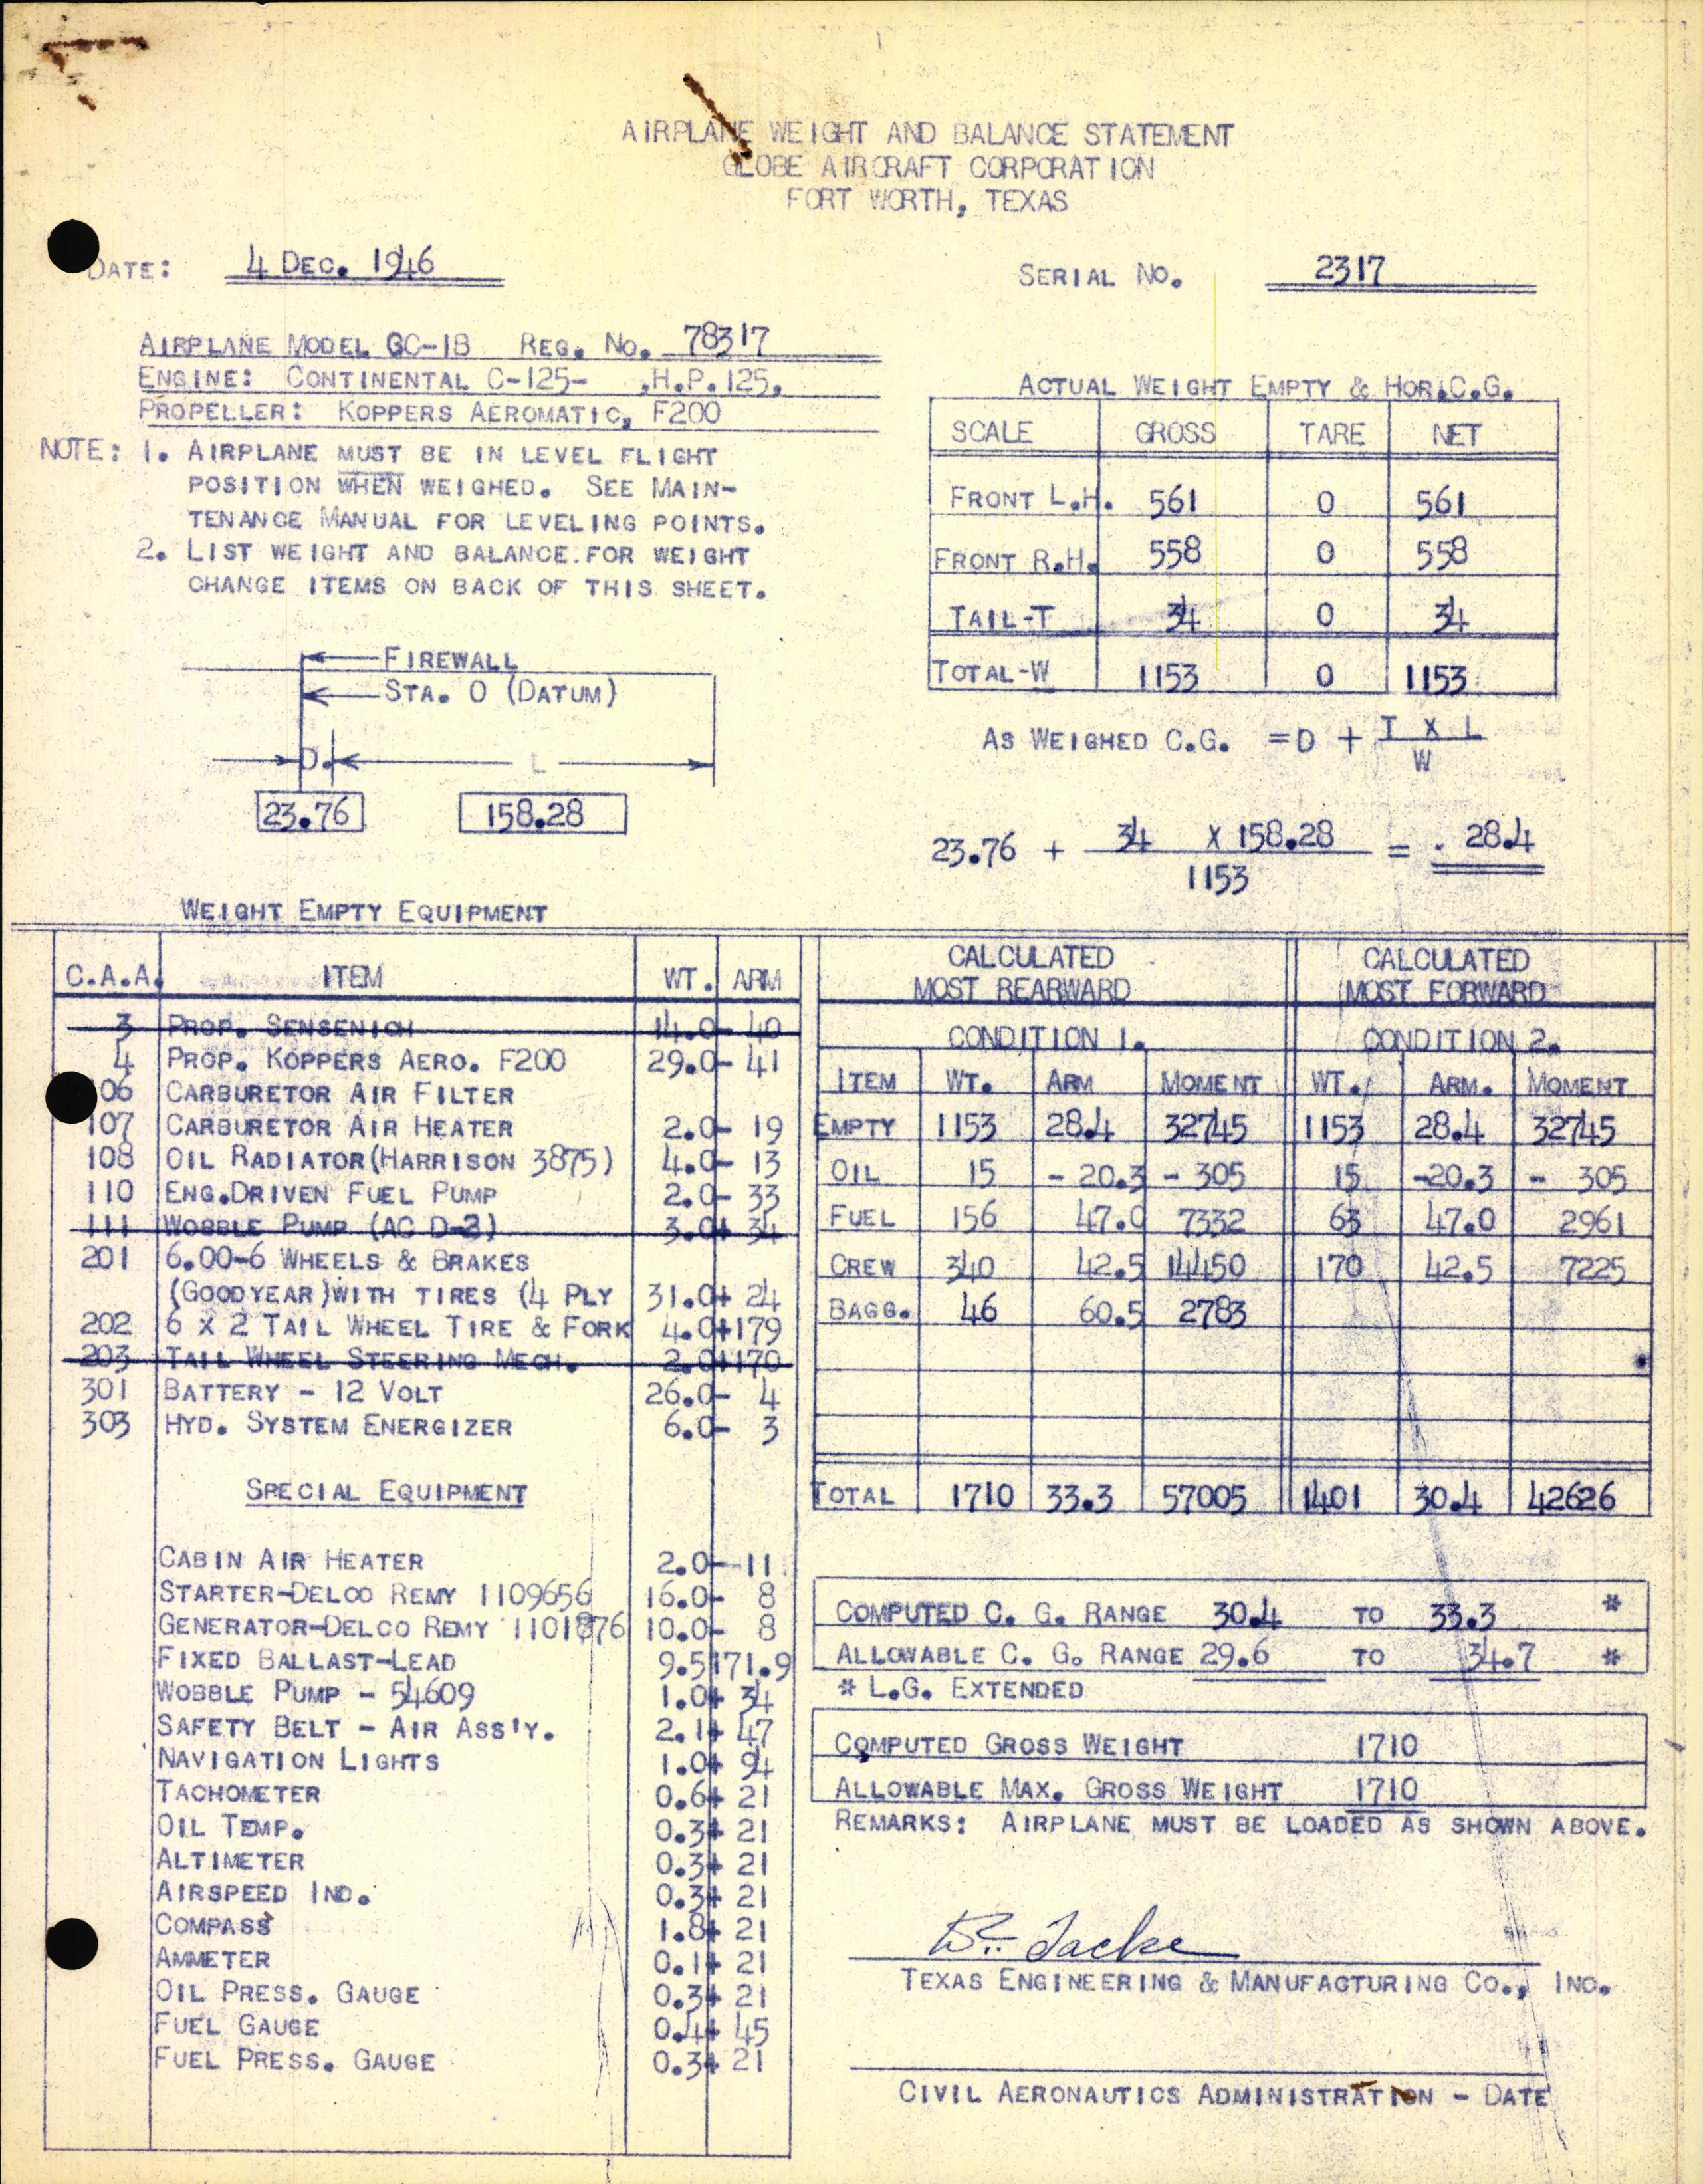 Sample page 1 from AirCorps Library document: Technical Information for Serial Number 2317